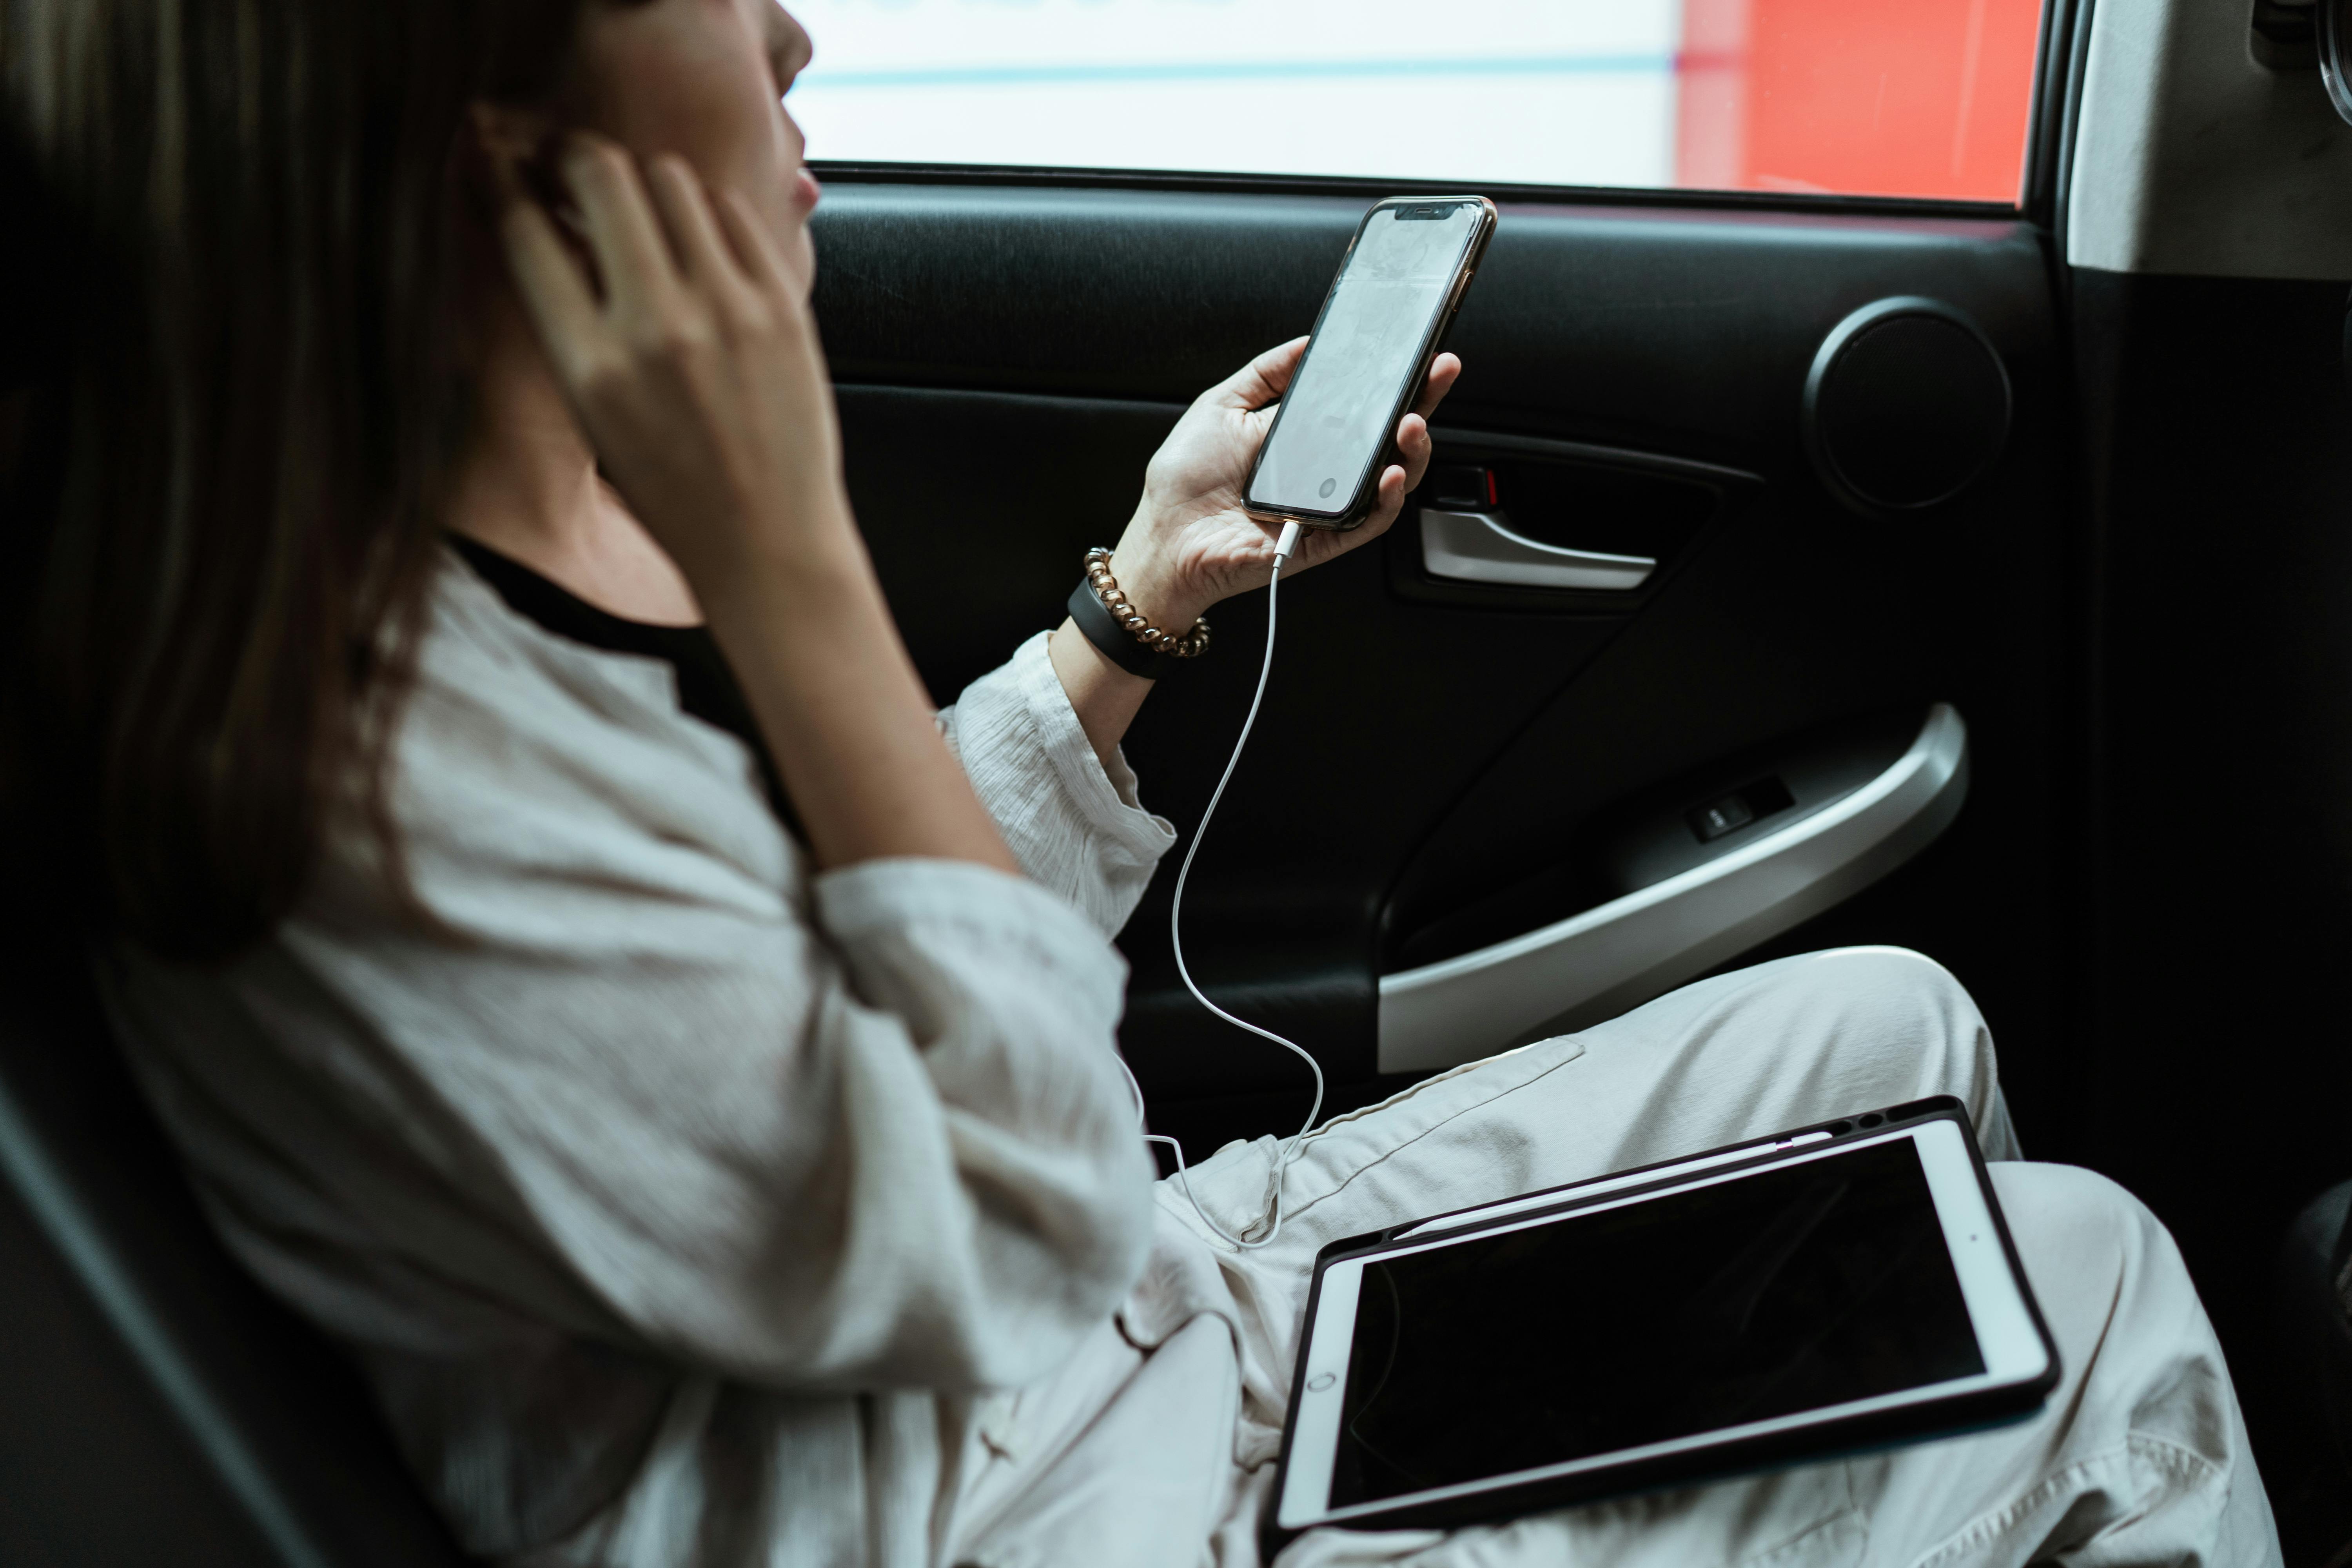 A woman sitting in a car holding a phone, wearing earphones, with a laptop on her lap | Source: Pexels